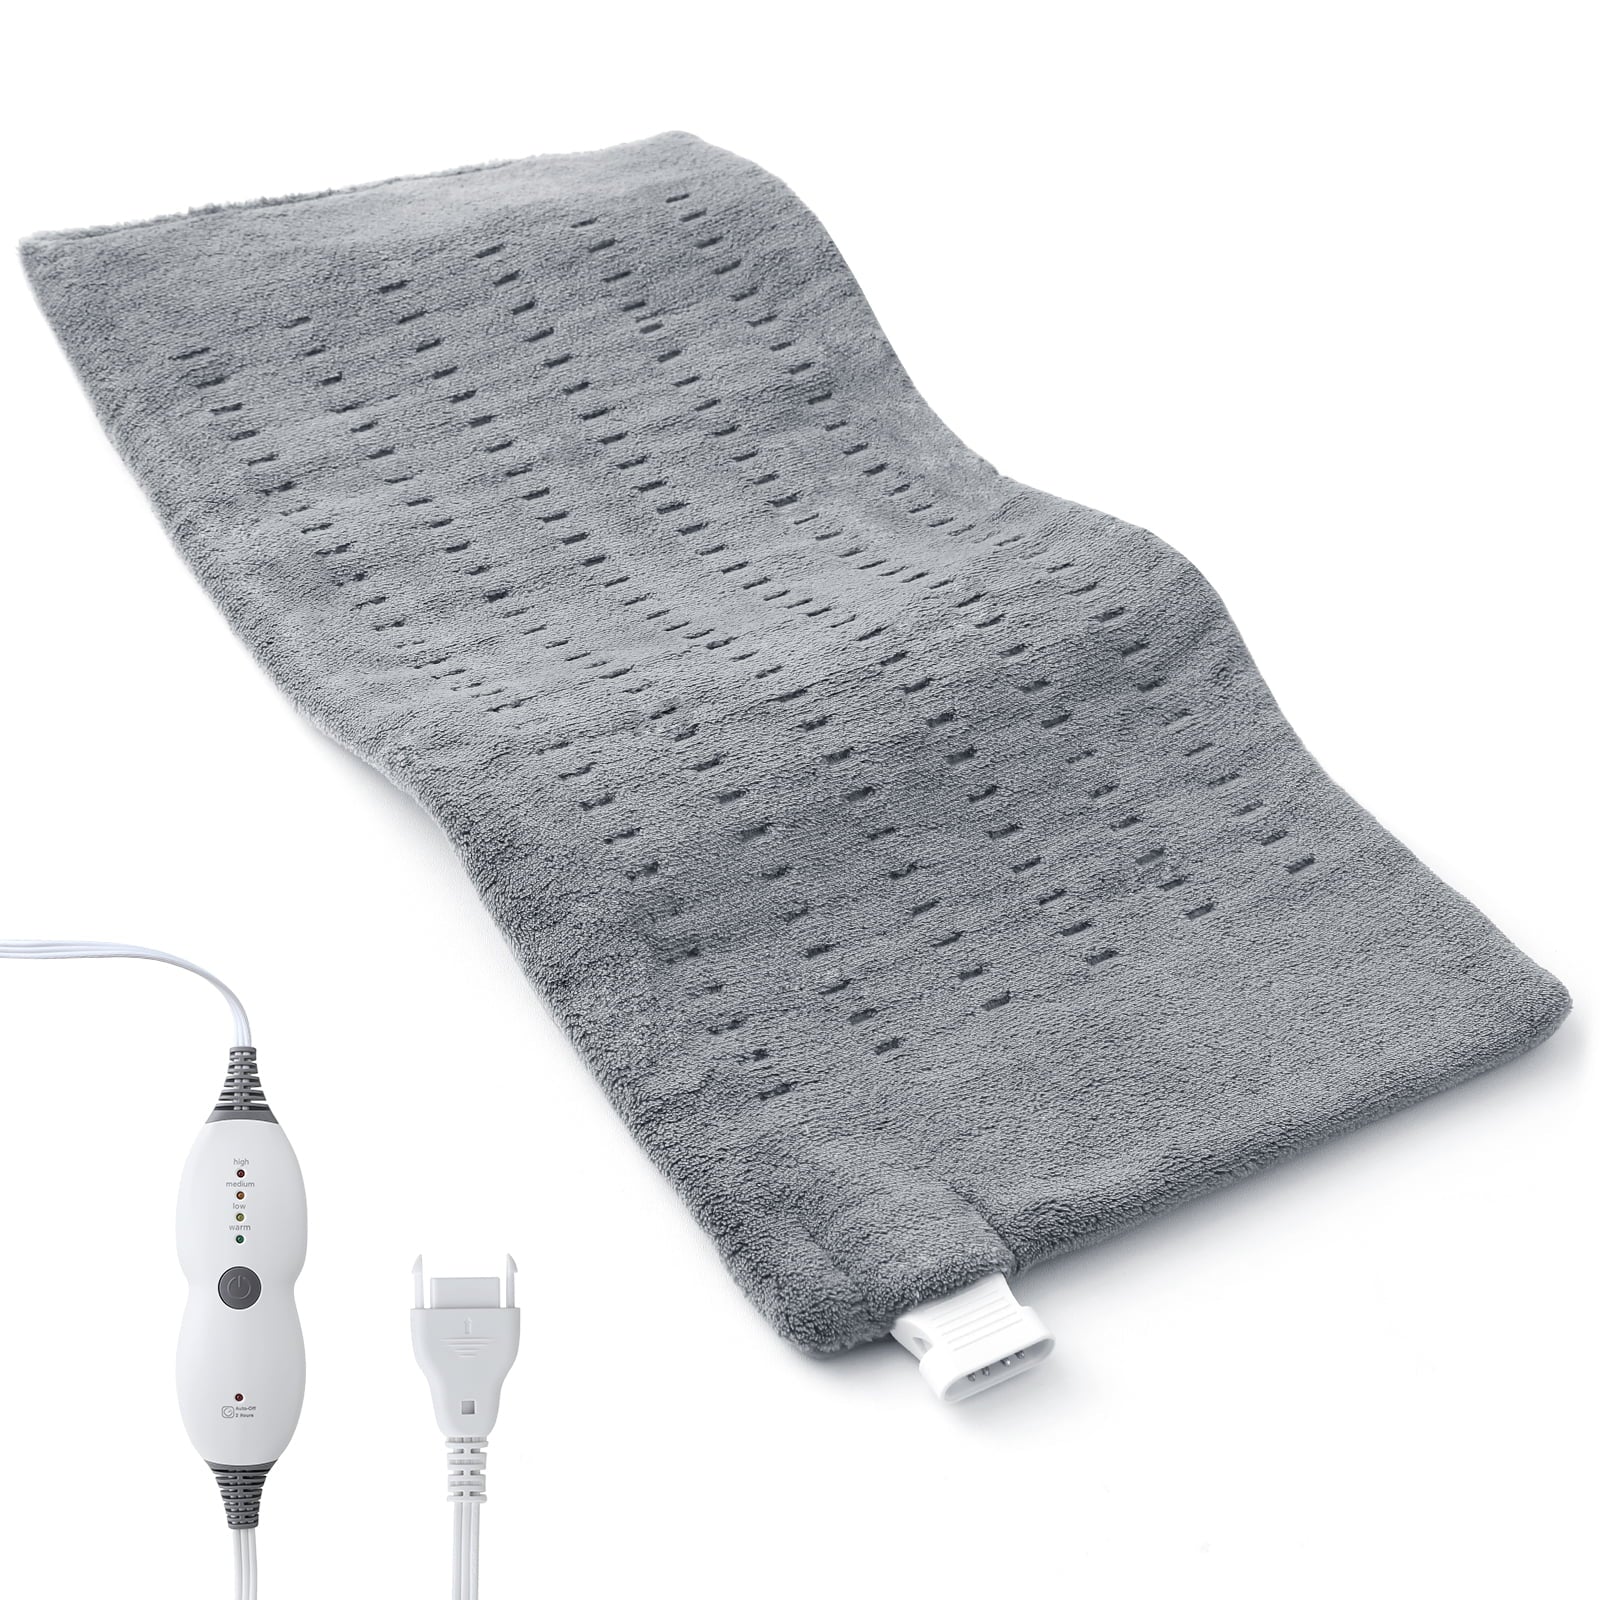 Sable Heating Pad for Fast Pain Relief, 12"x24" Hot Heated Pad with 4 Heat Setting